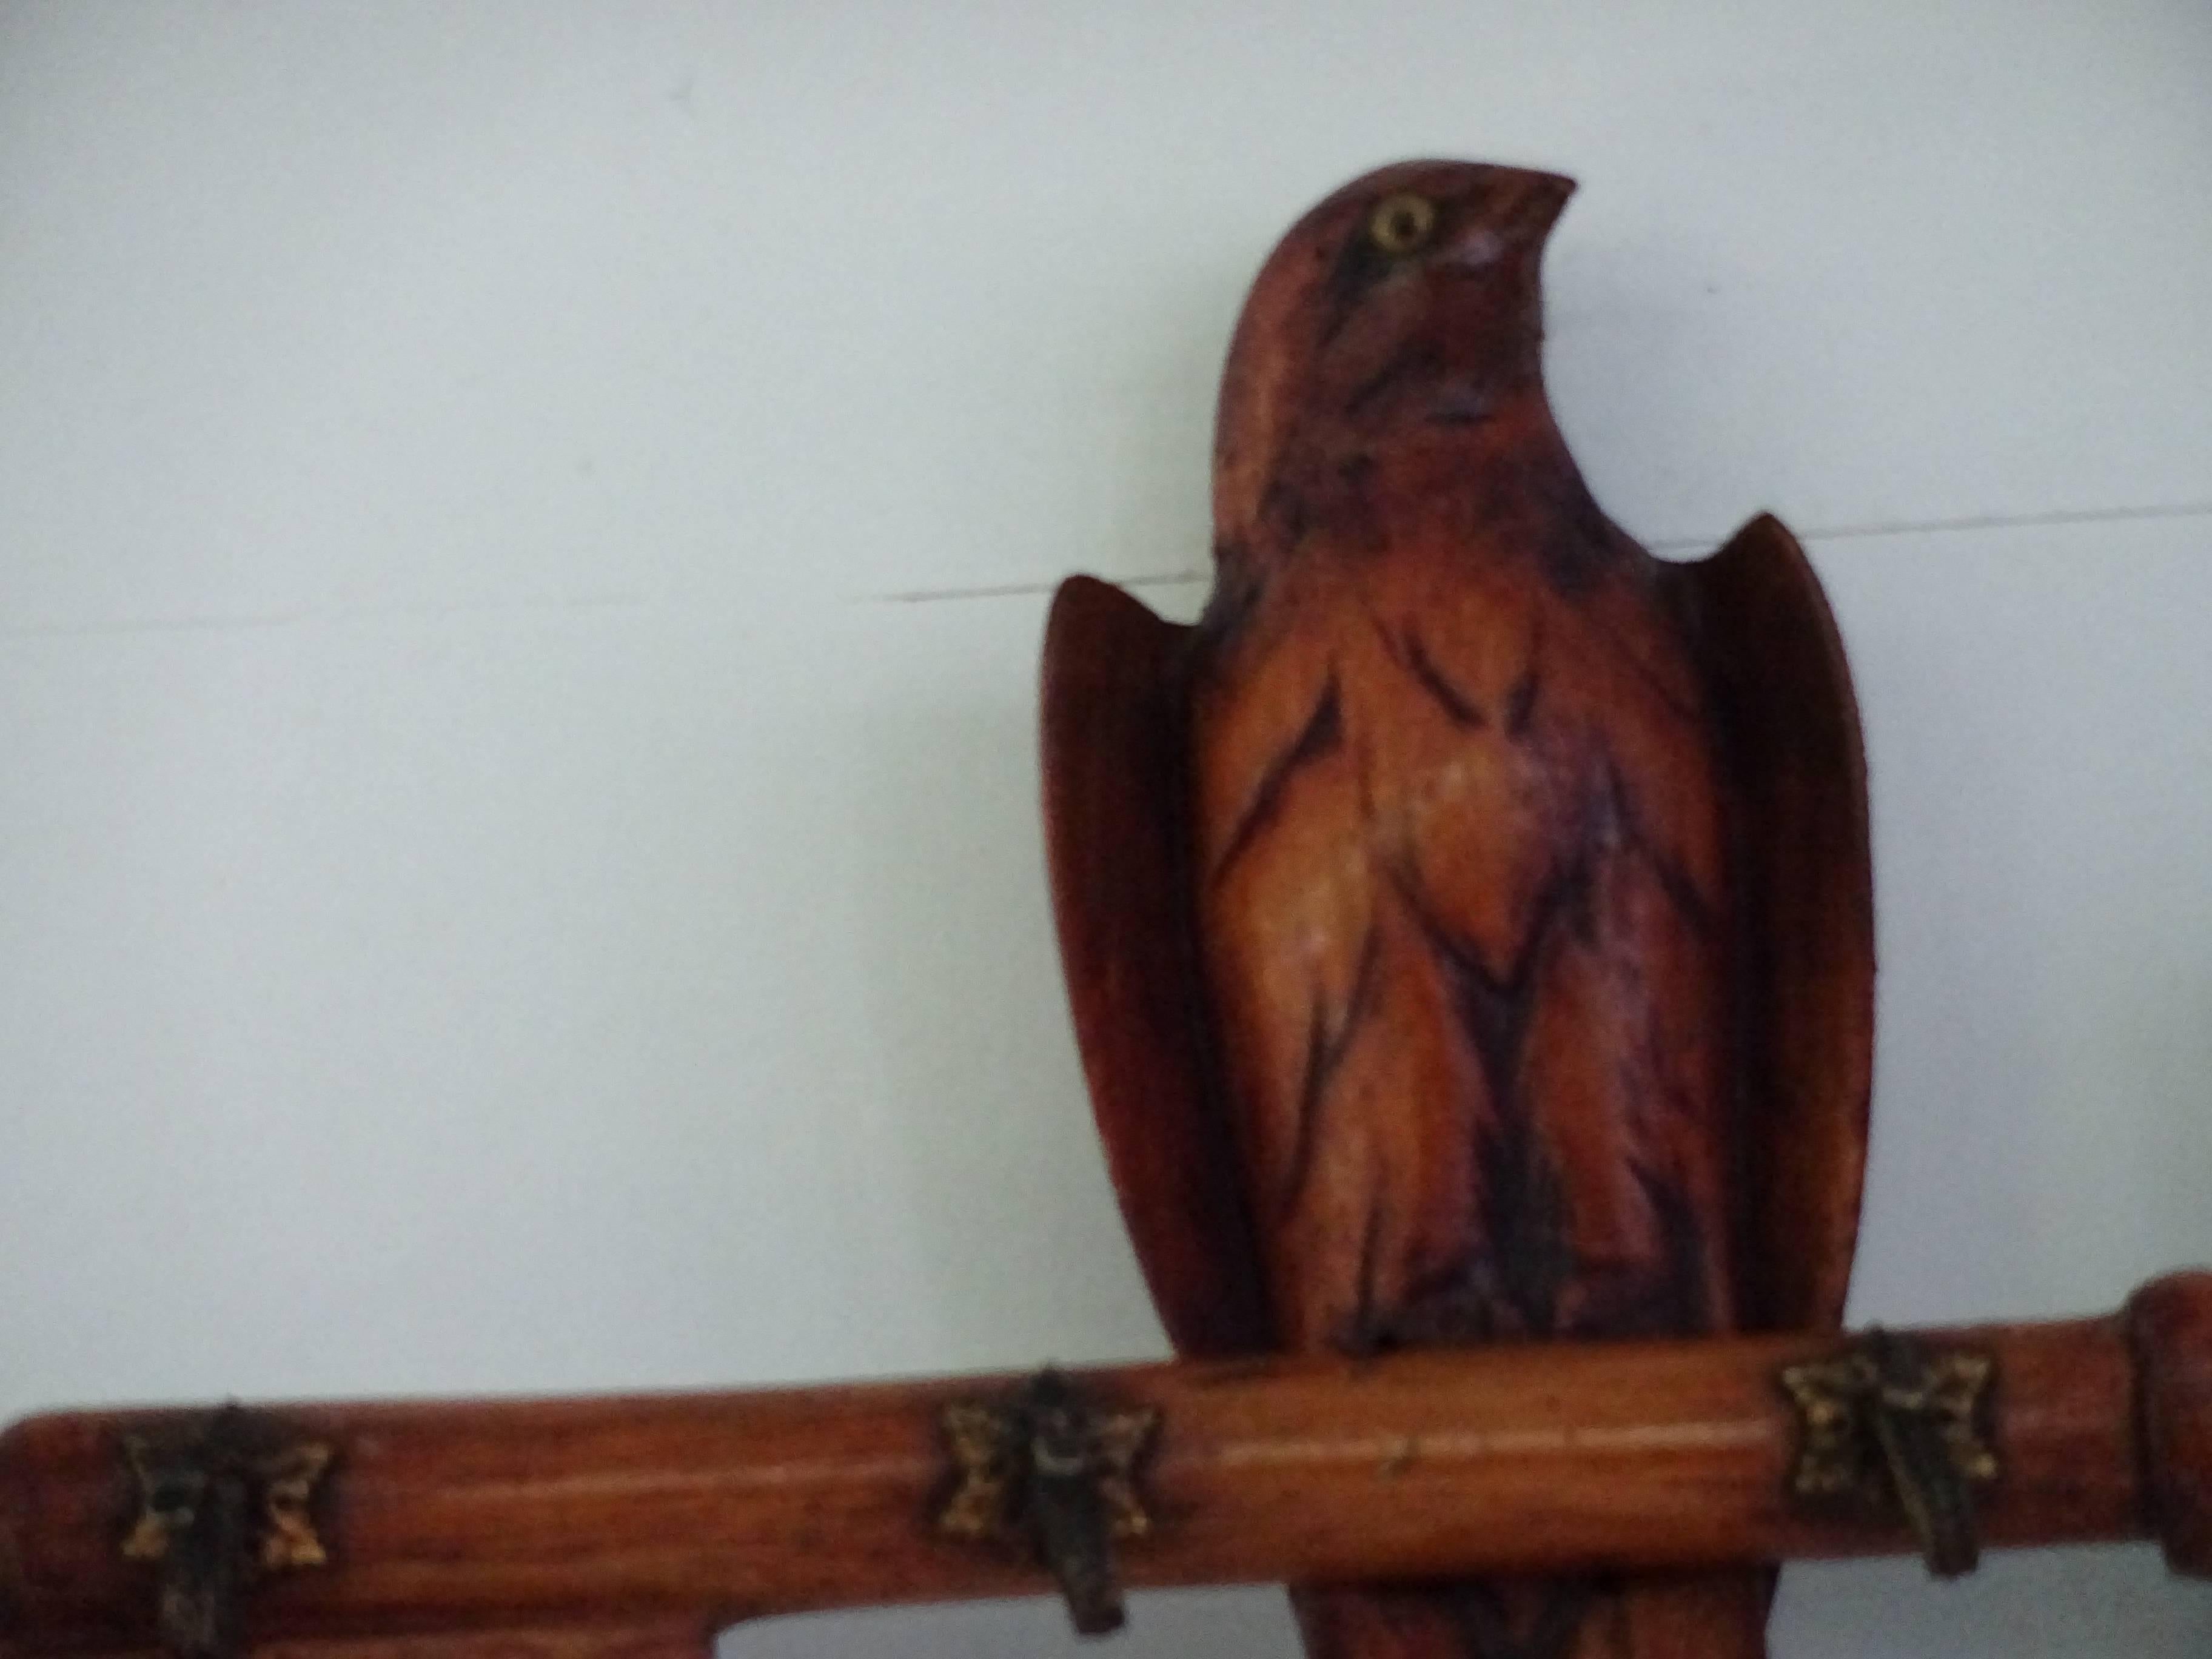 An Edwardian English carved coat hook in the form of a key with a bird
perched on to it. Four small metal hooks to hold clothing. Hanging hook
on the reverse side. Probably from a church with a cross carved into the
key.